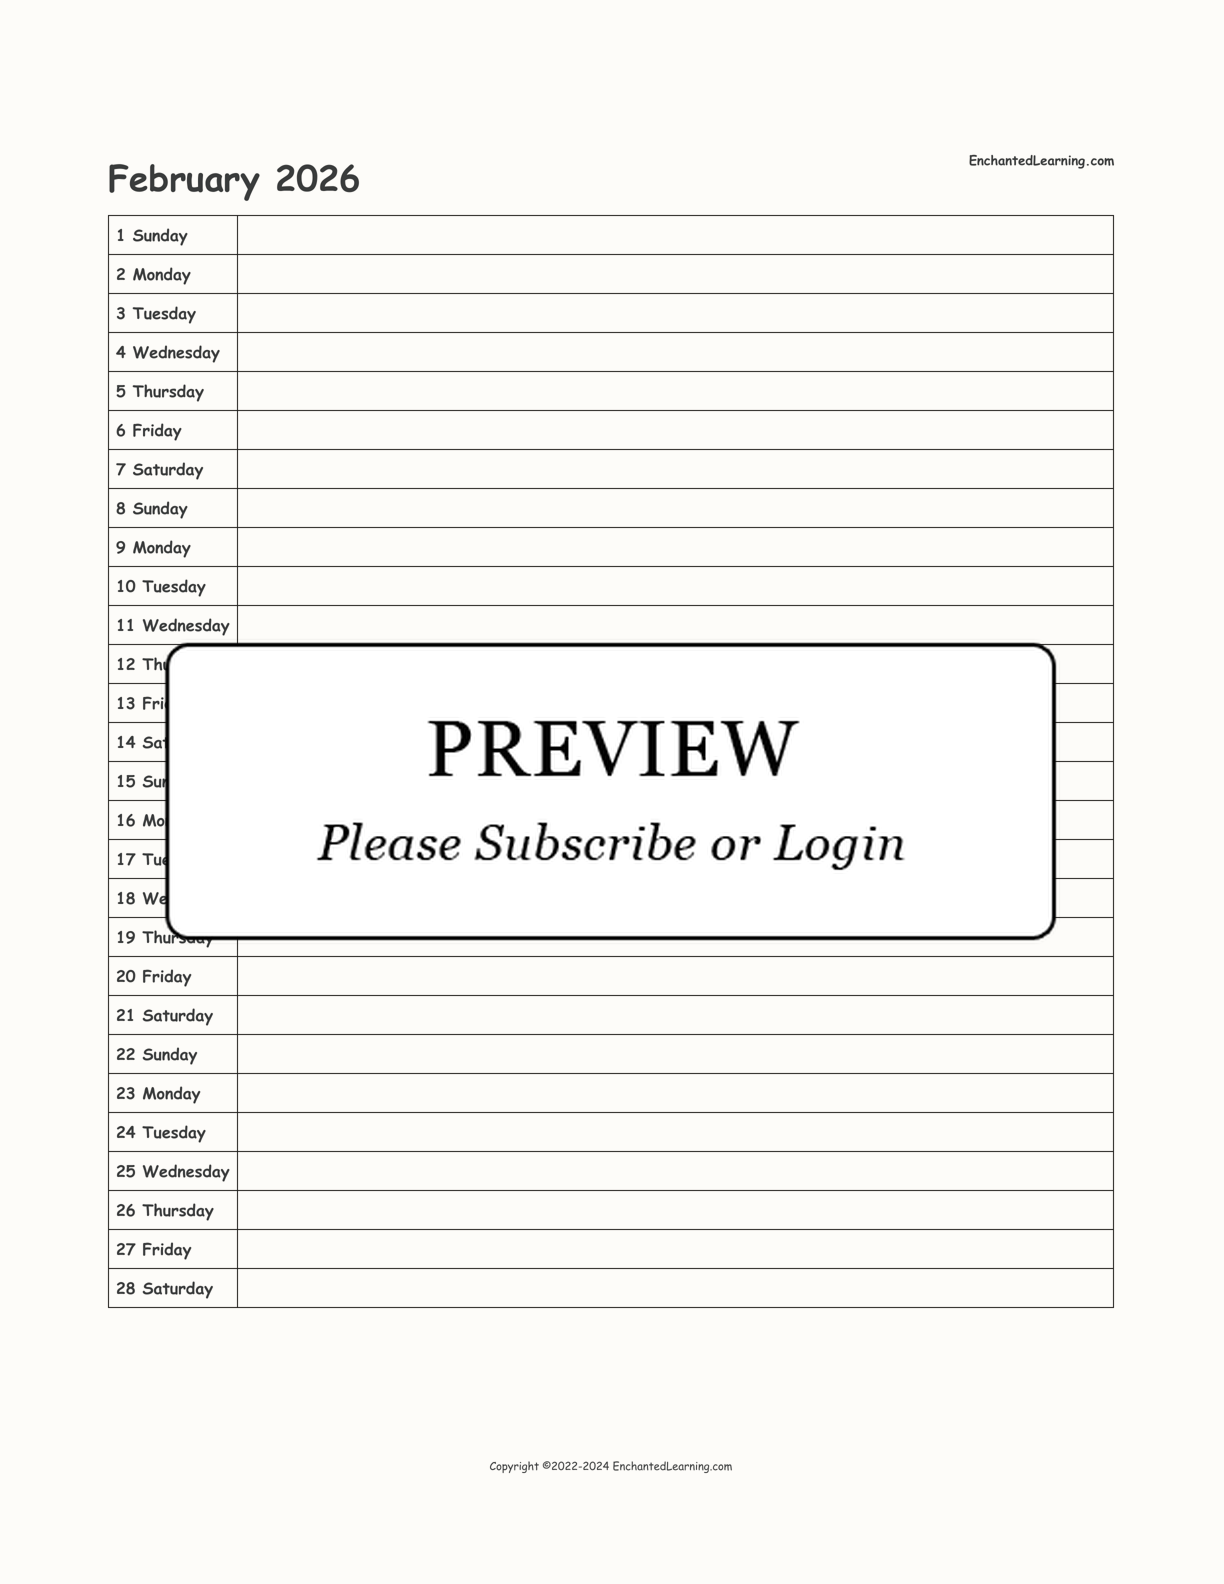 2026 Scheduling Calendar interactive printout page 2